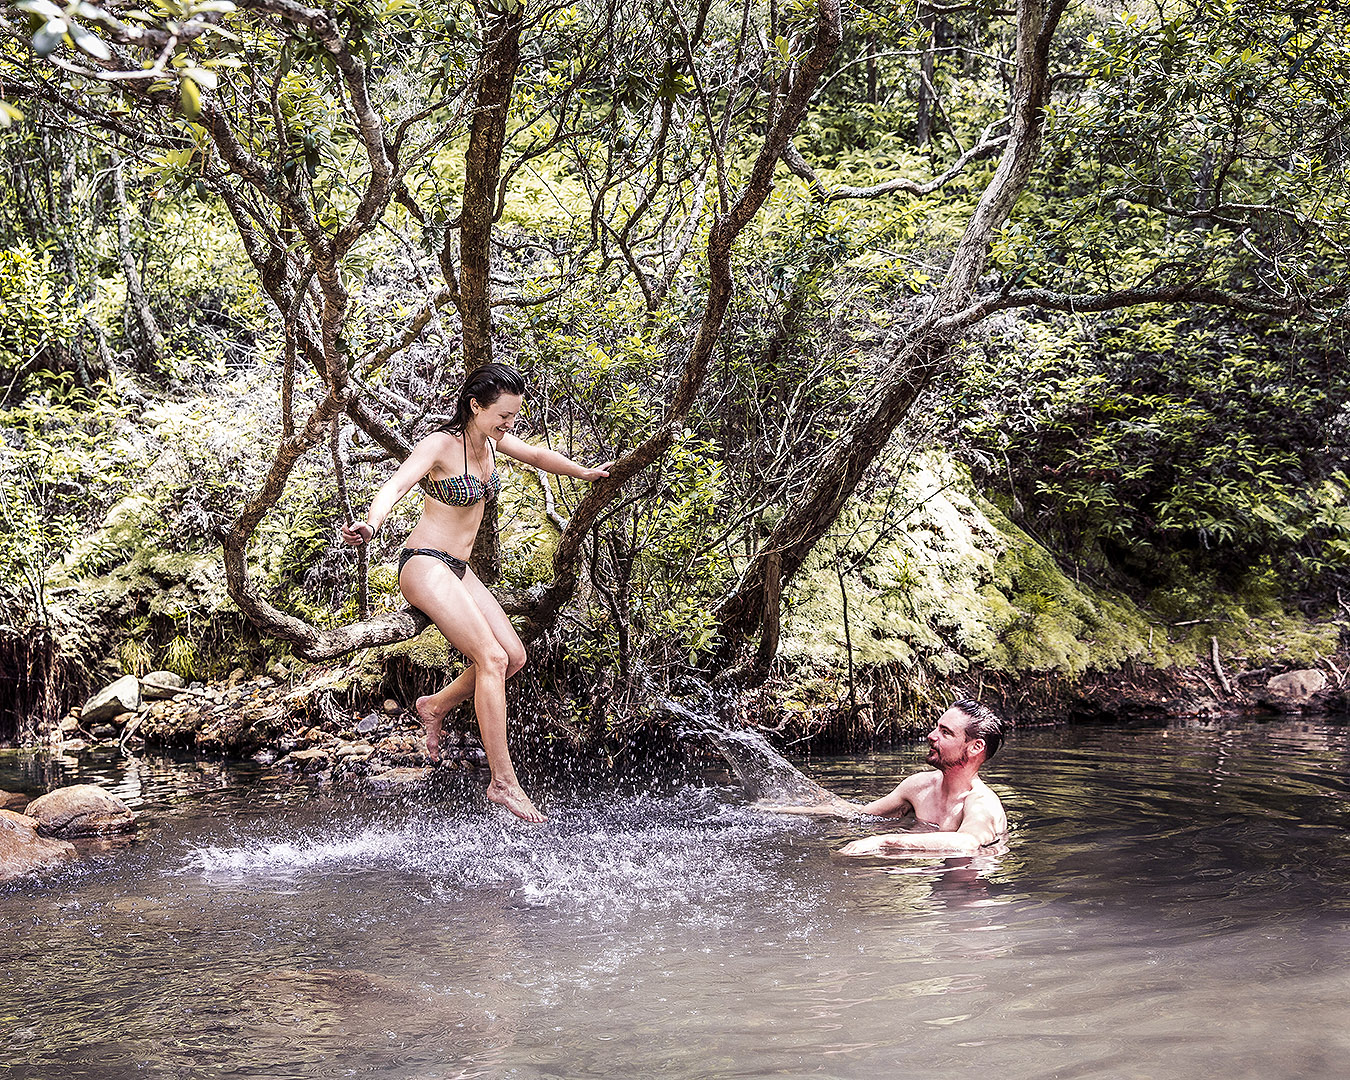 A couple frolic amongst the hot Springs.